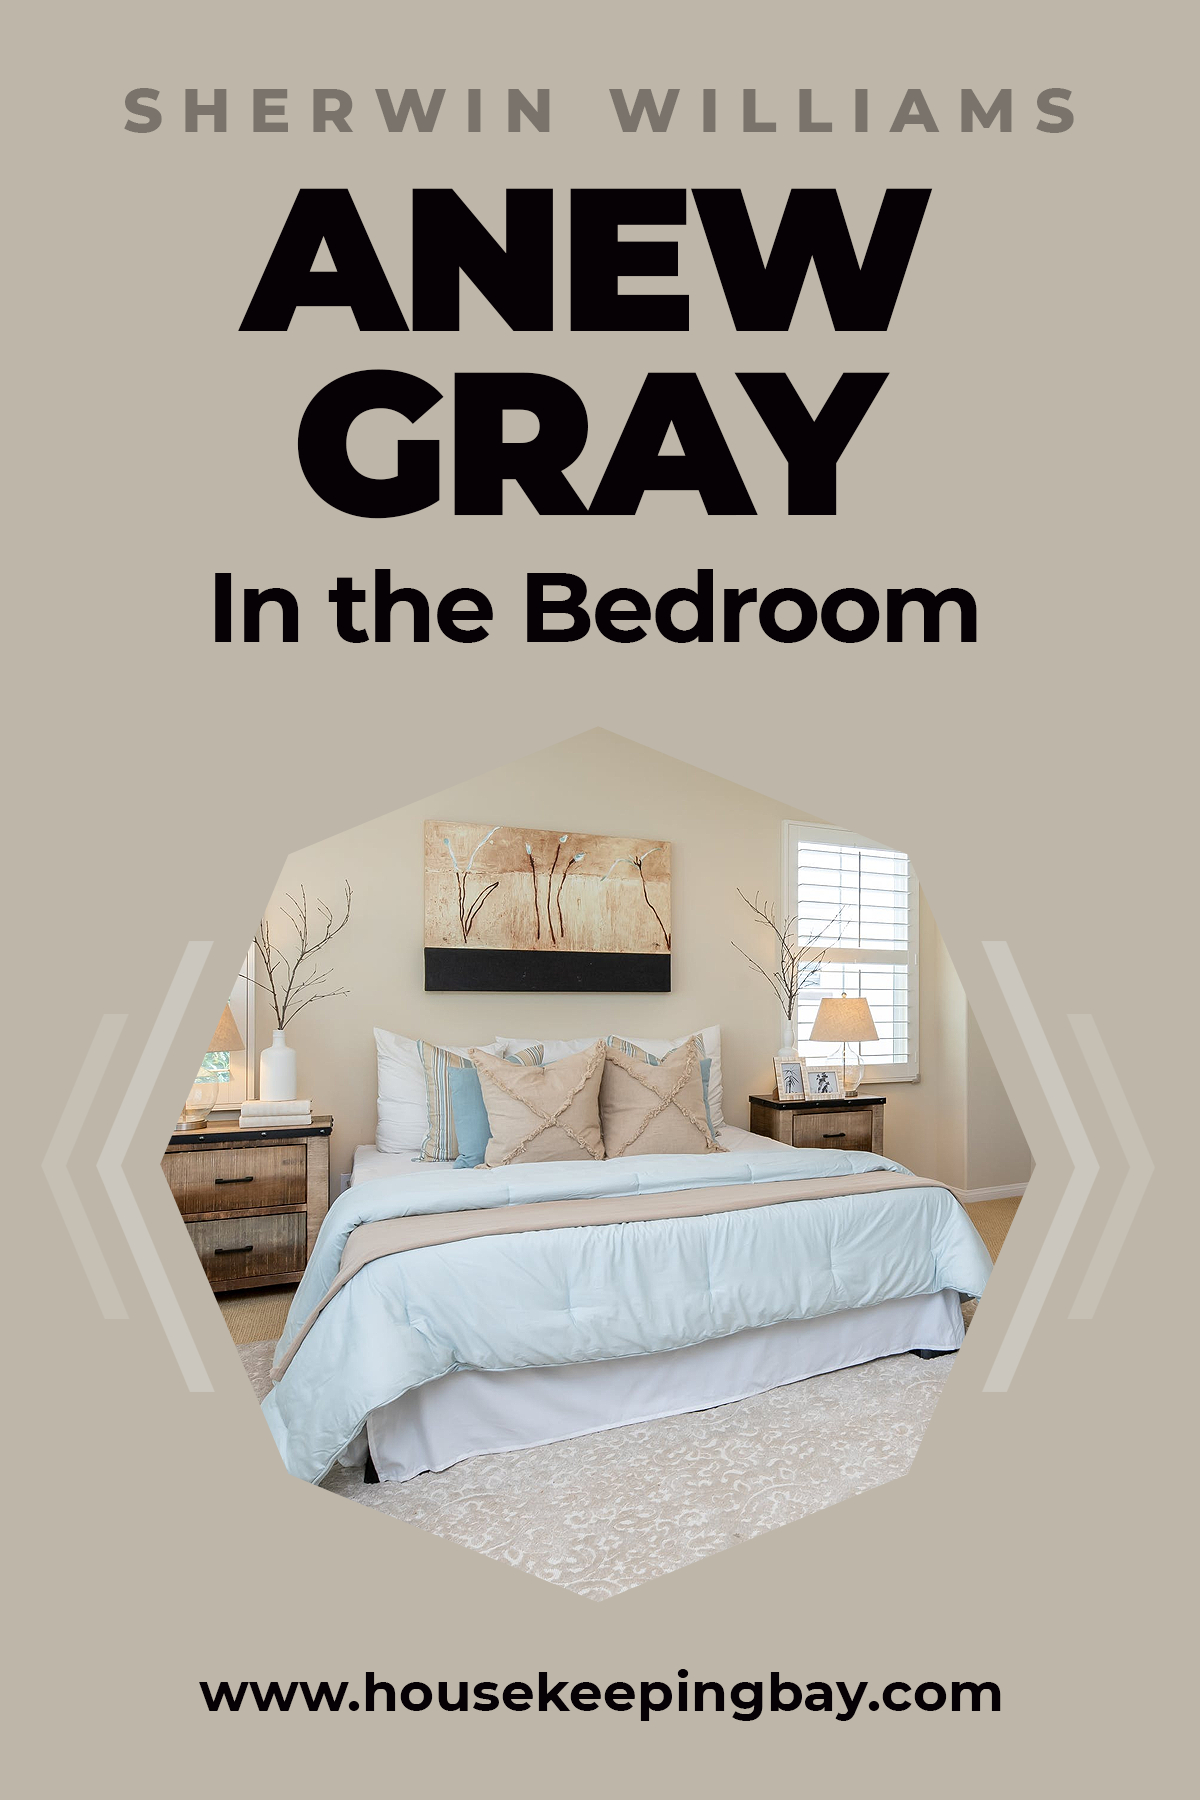 Anew Gray In the Bedroom